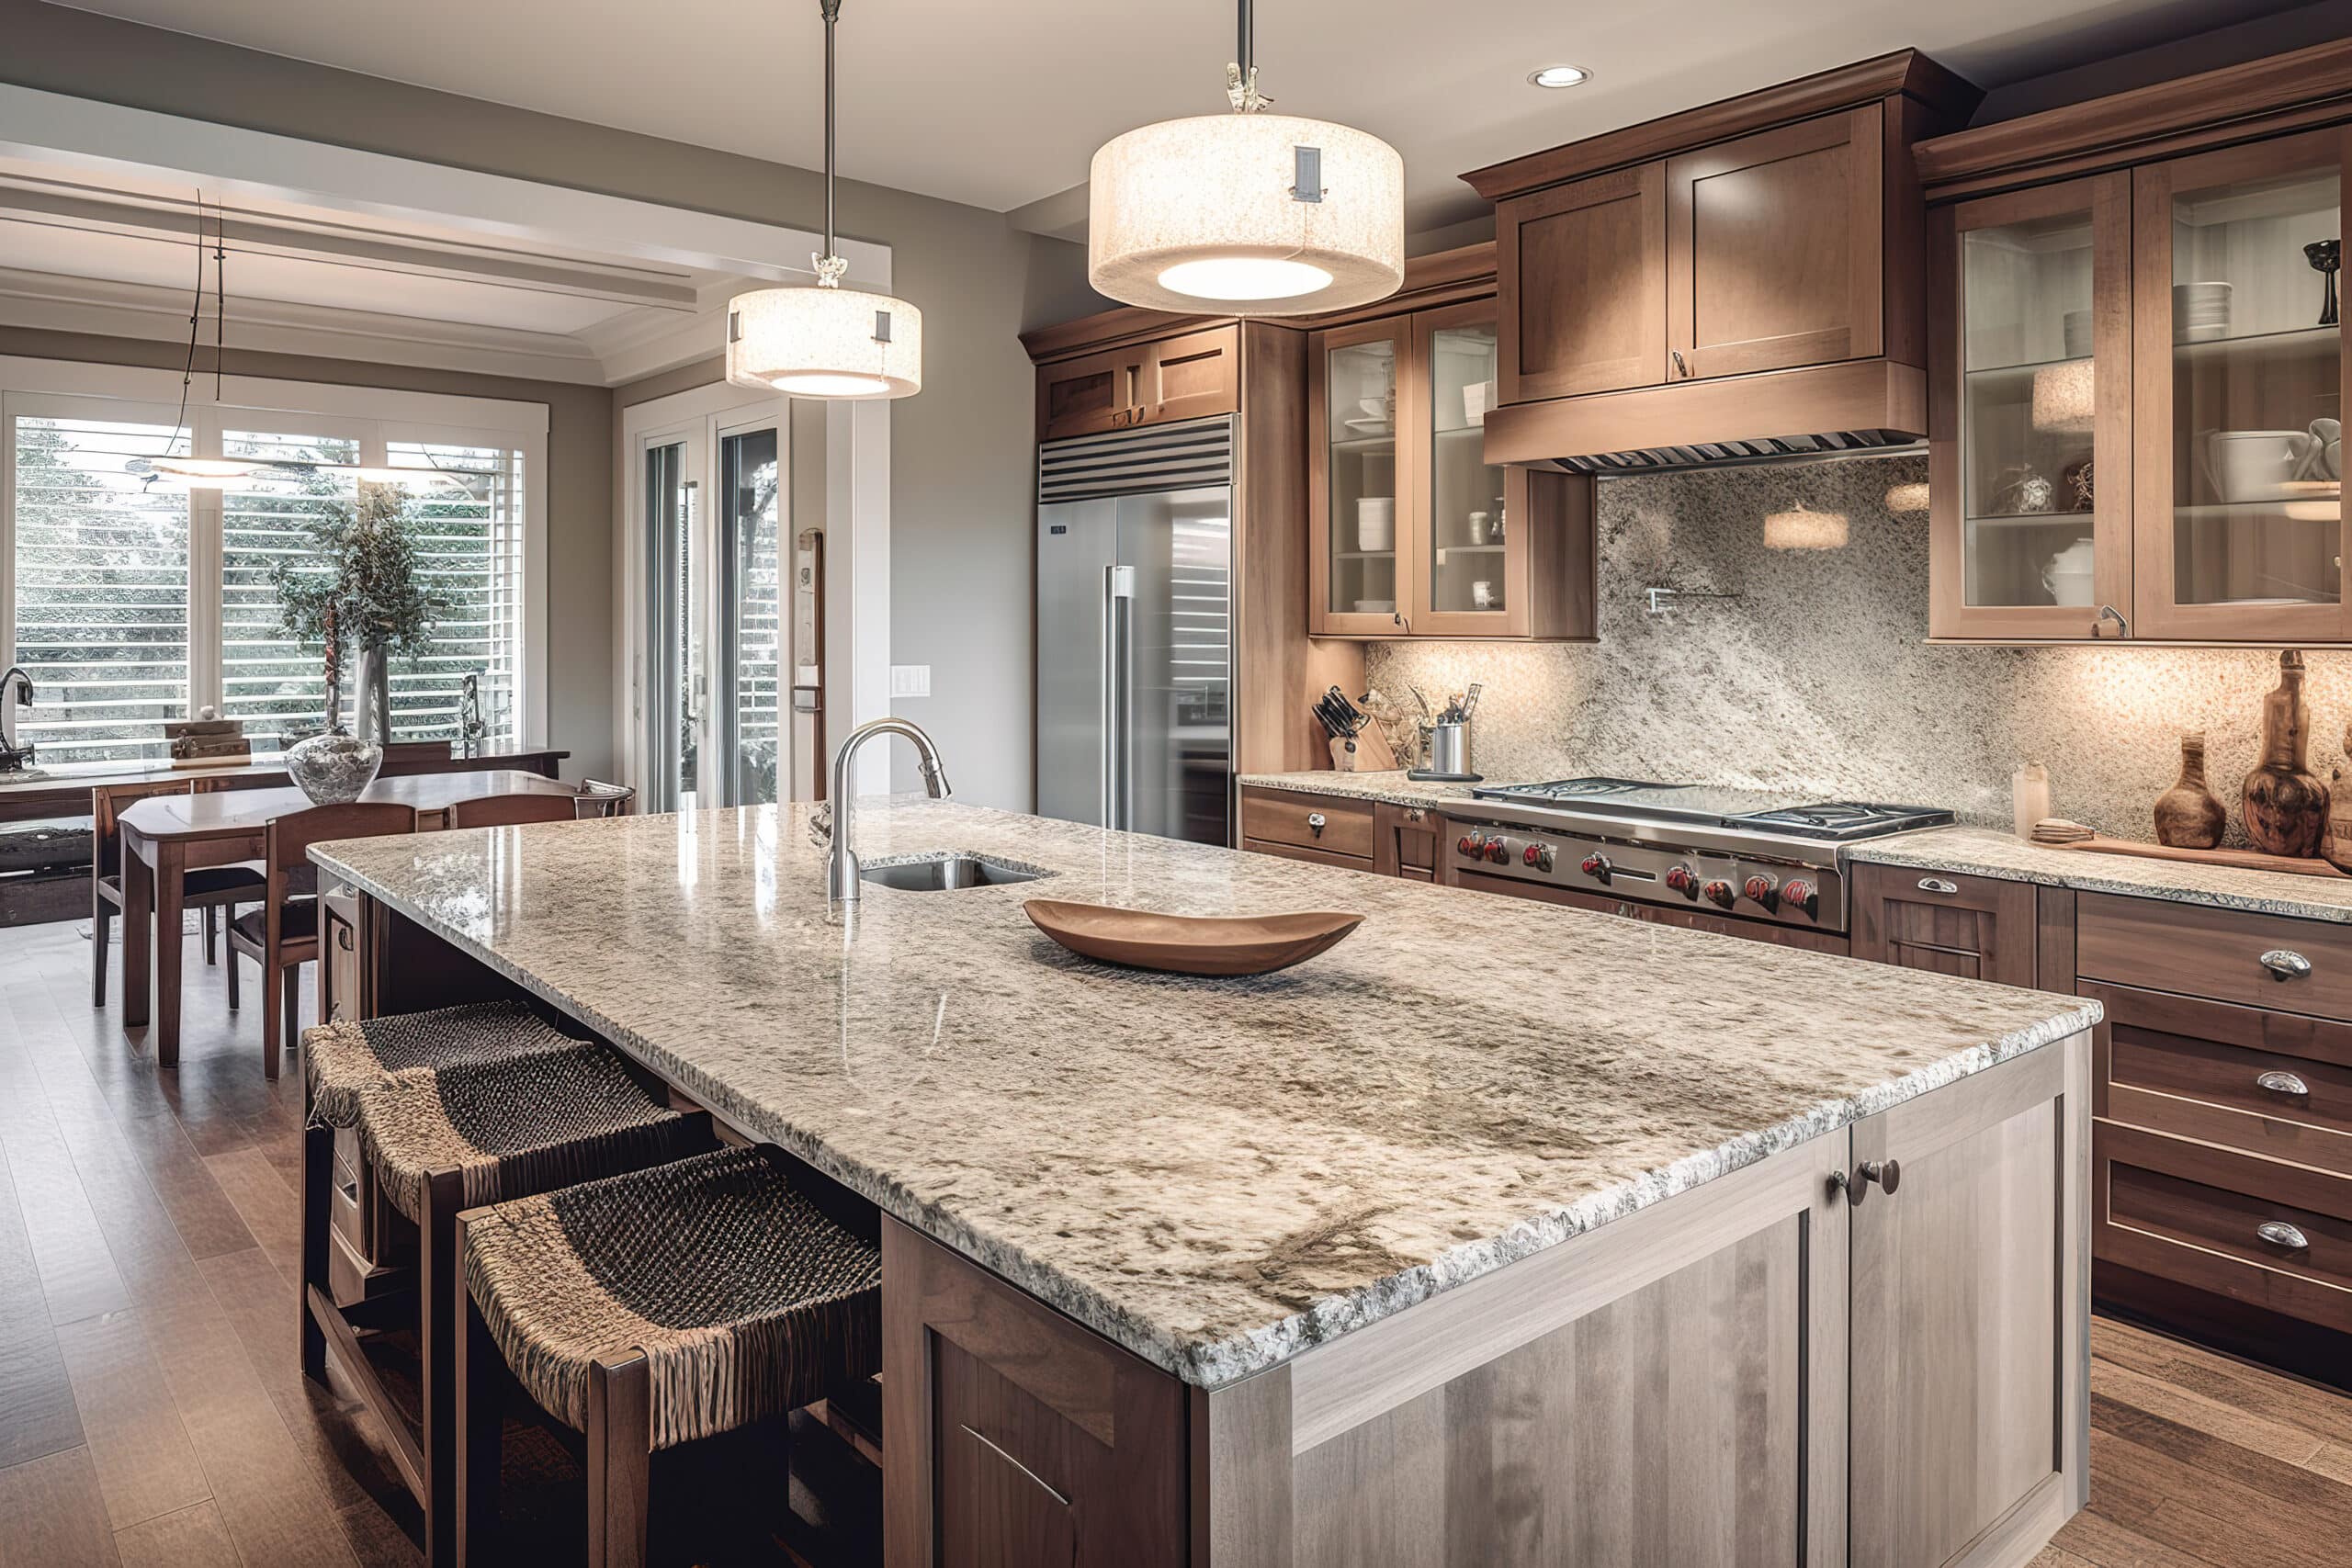 Luxury kitchen design with wood cabinets and white granite countertop